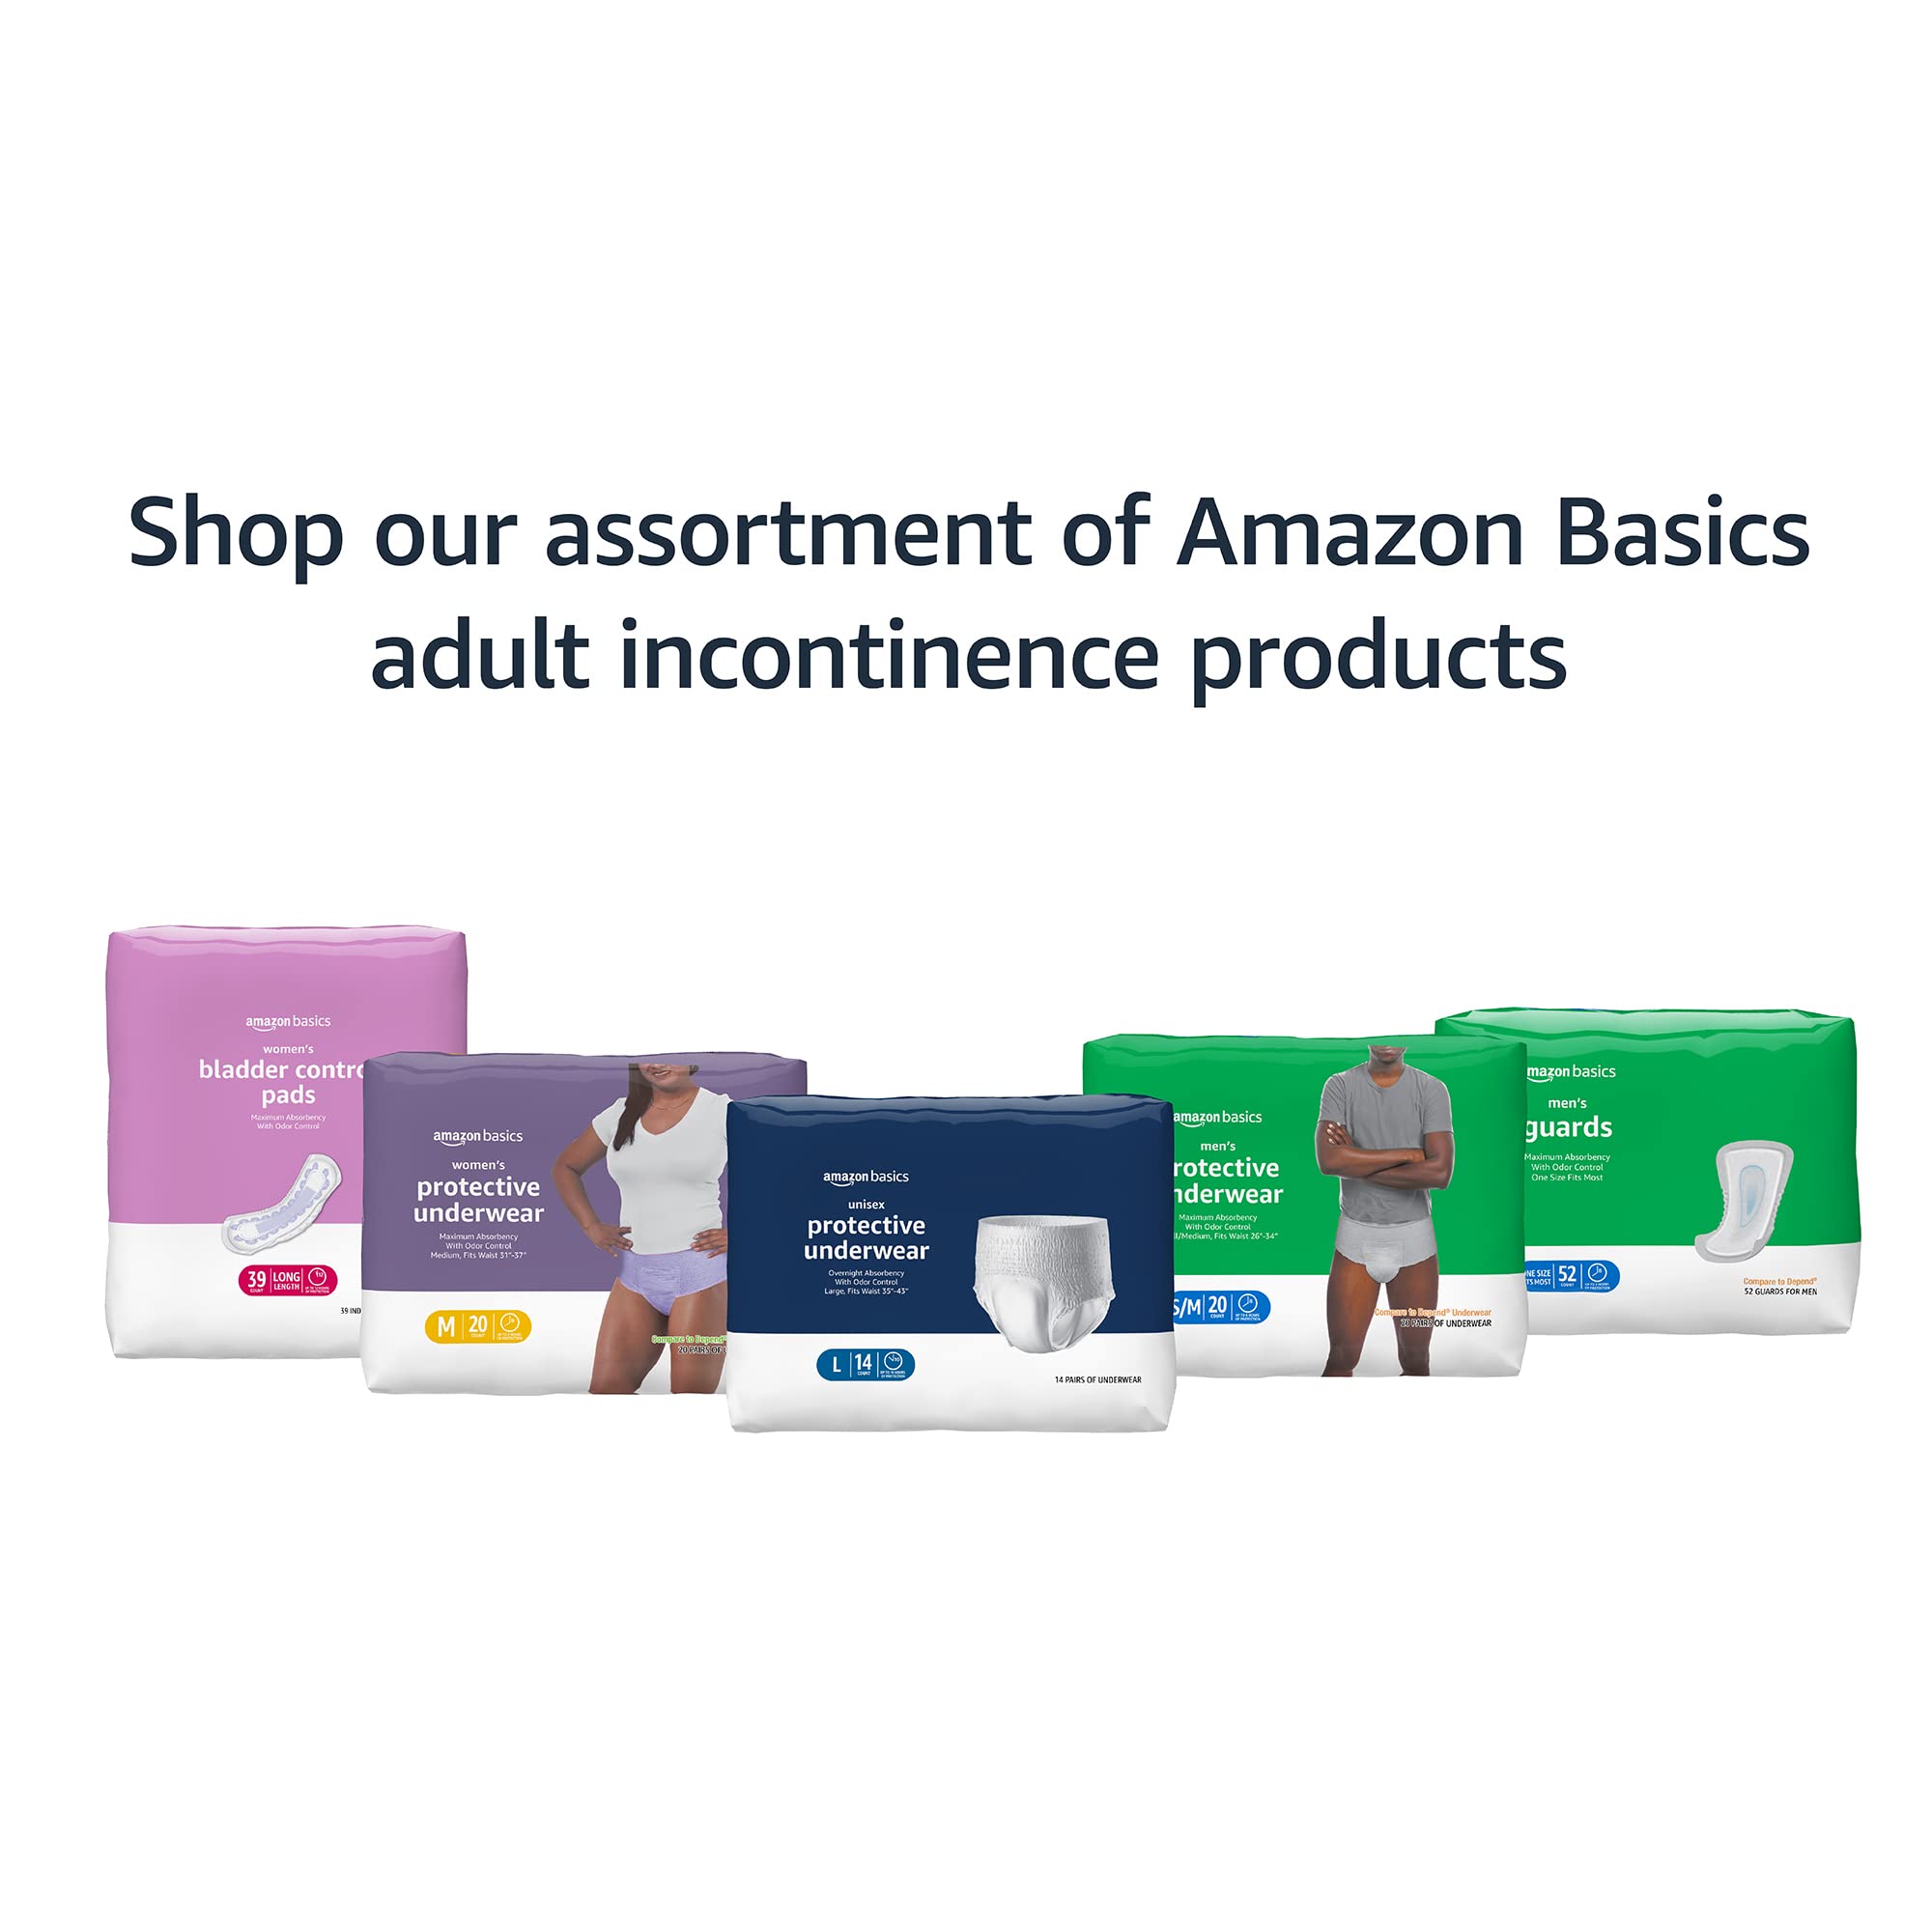 Amazon Basics Incontinence Guards for Men, Maximum Absorbency, 104 Count, 2 Packs of 52, White (Previously Solimo)